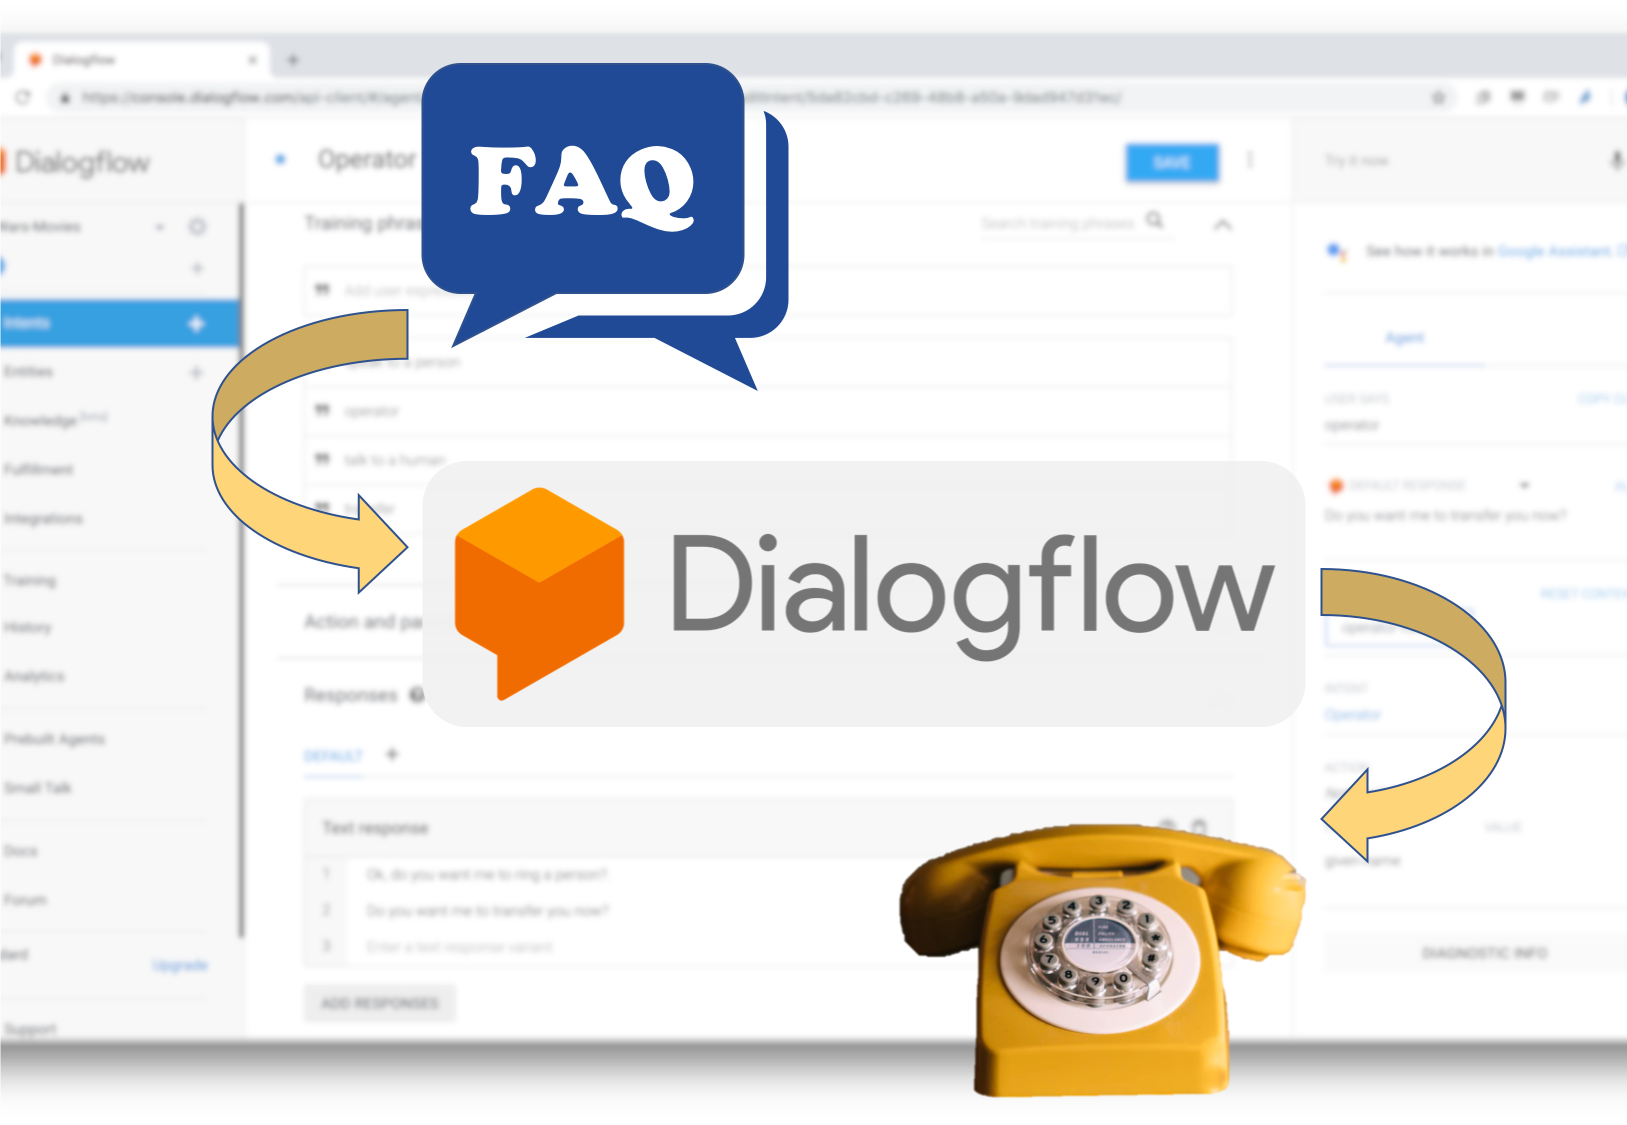 cogint.ai: How to make a dial-in IVR with Dialogflow